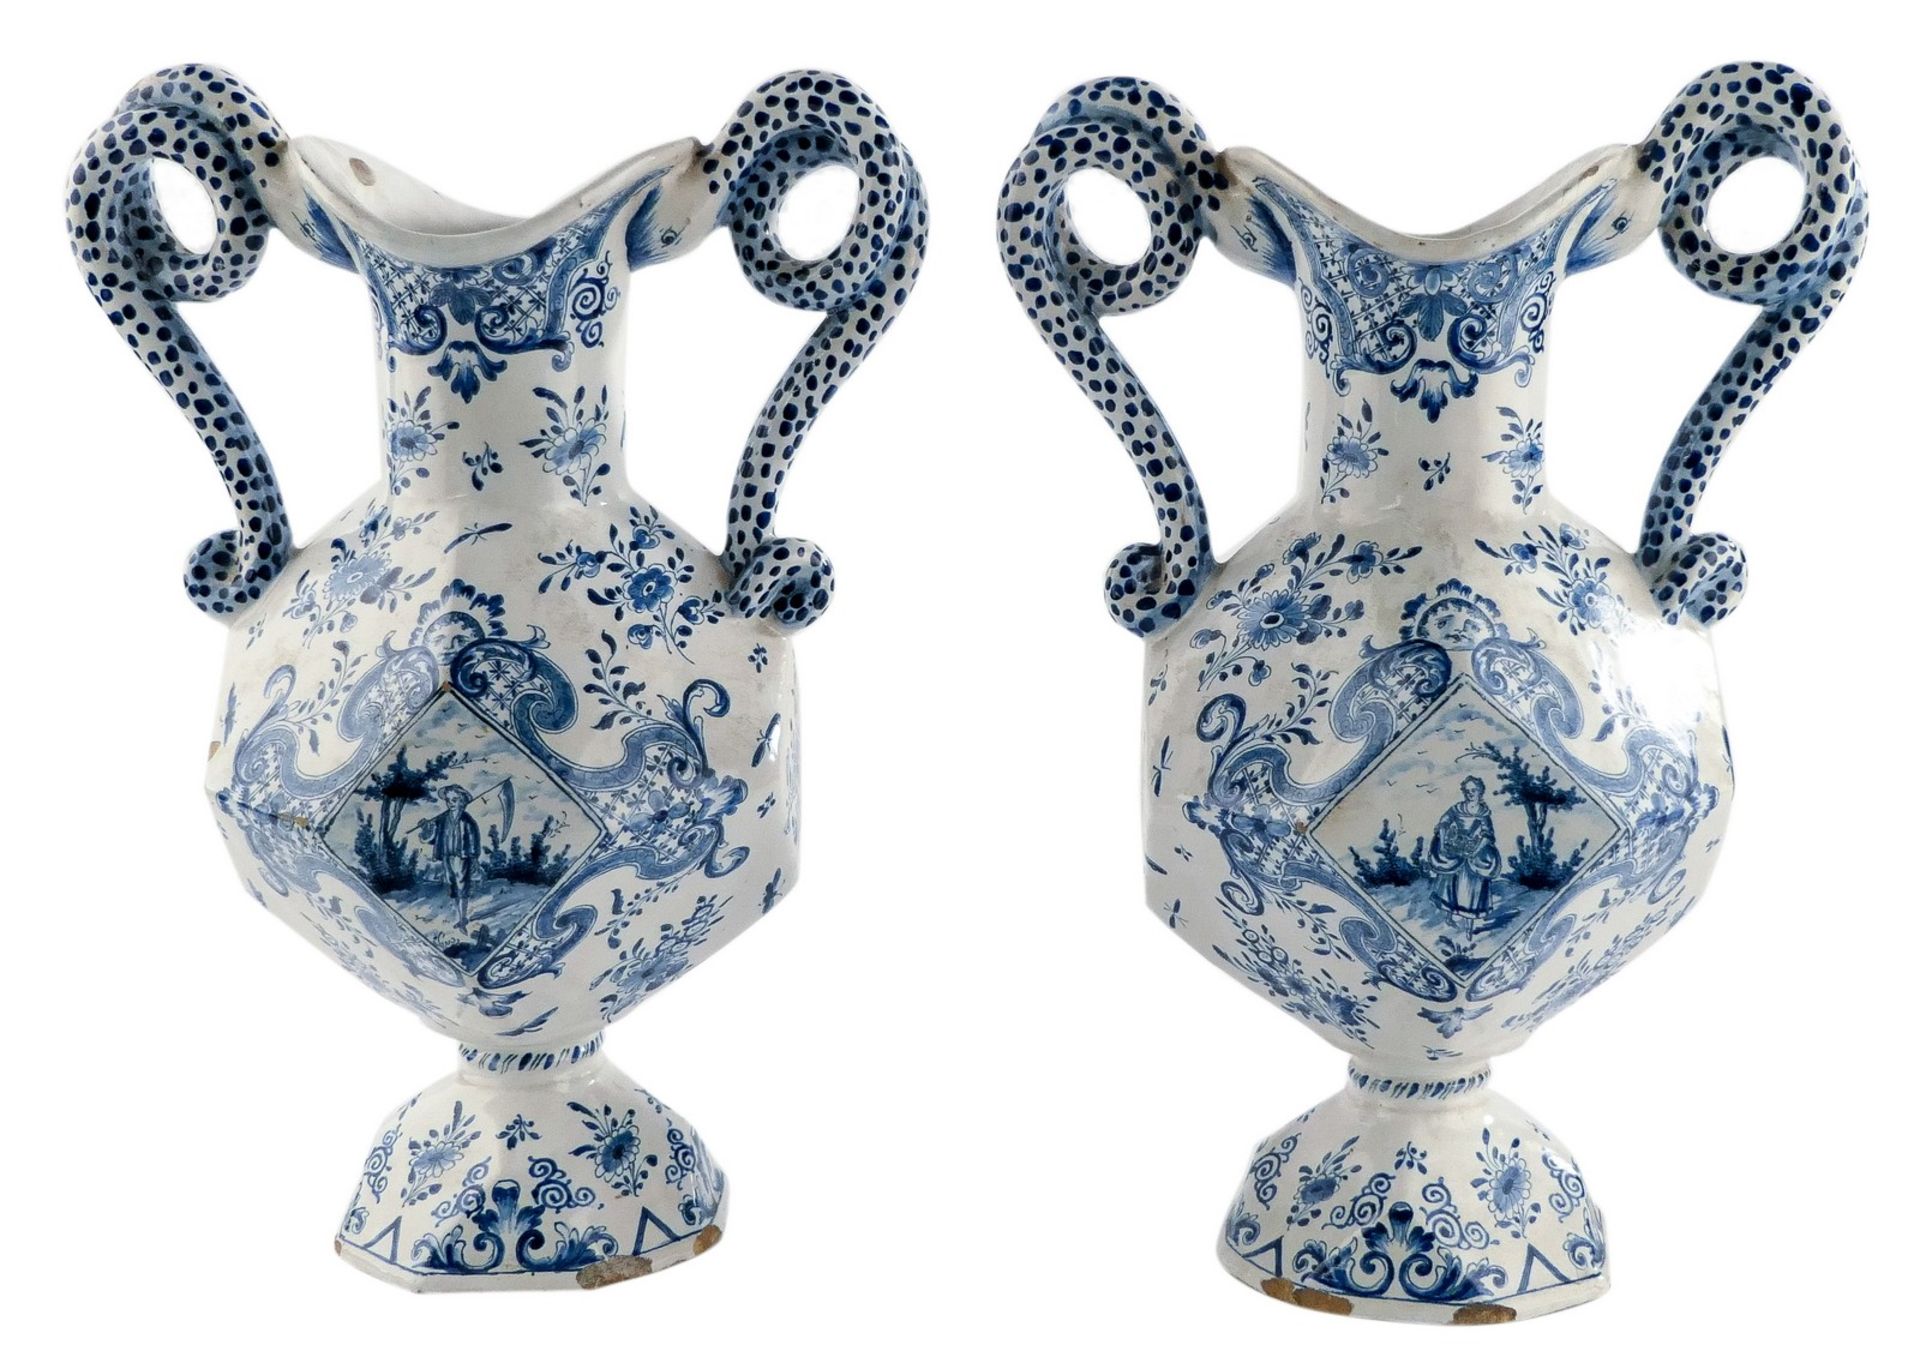 Two ornamental vases, tin glazed and blue decorated earthenware, (Dutch Delftware - marked 'De